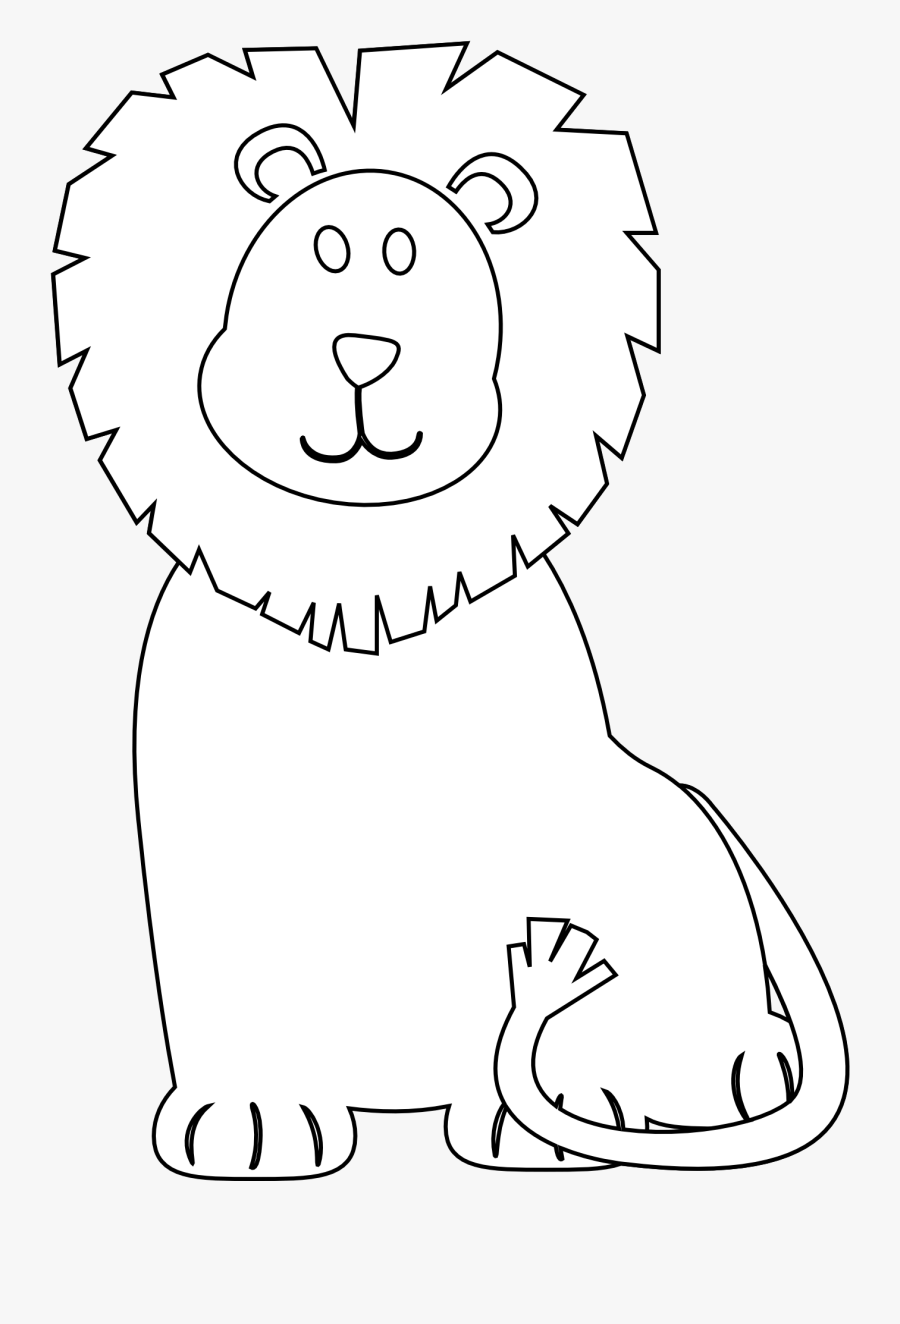 Black And White Pictures Of Animals - Drawing, Transparent Clipart